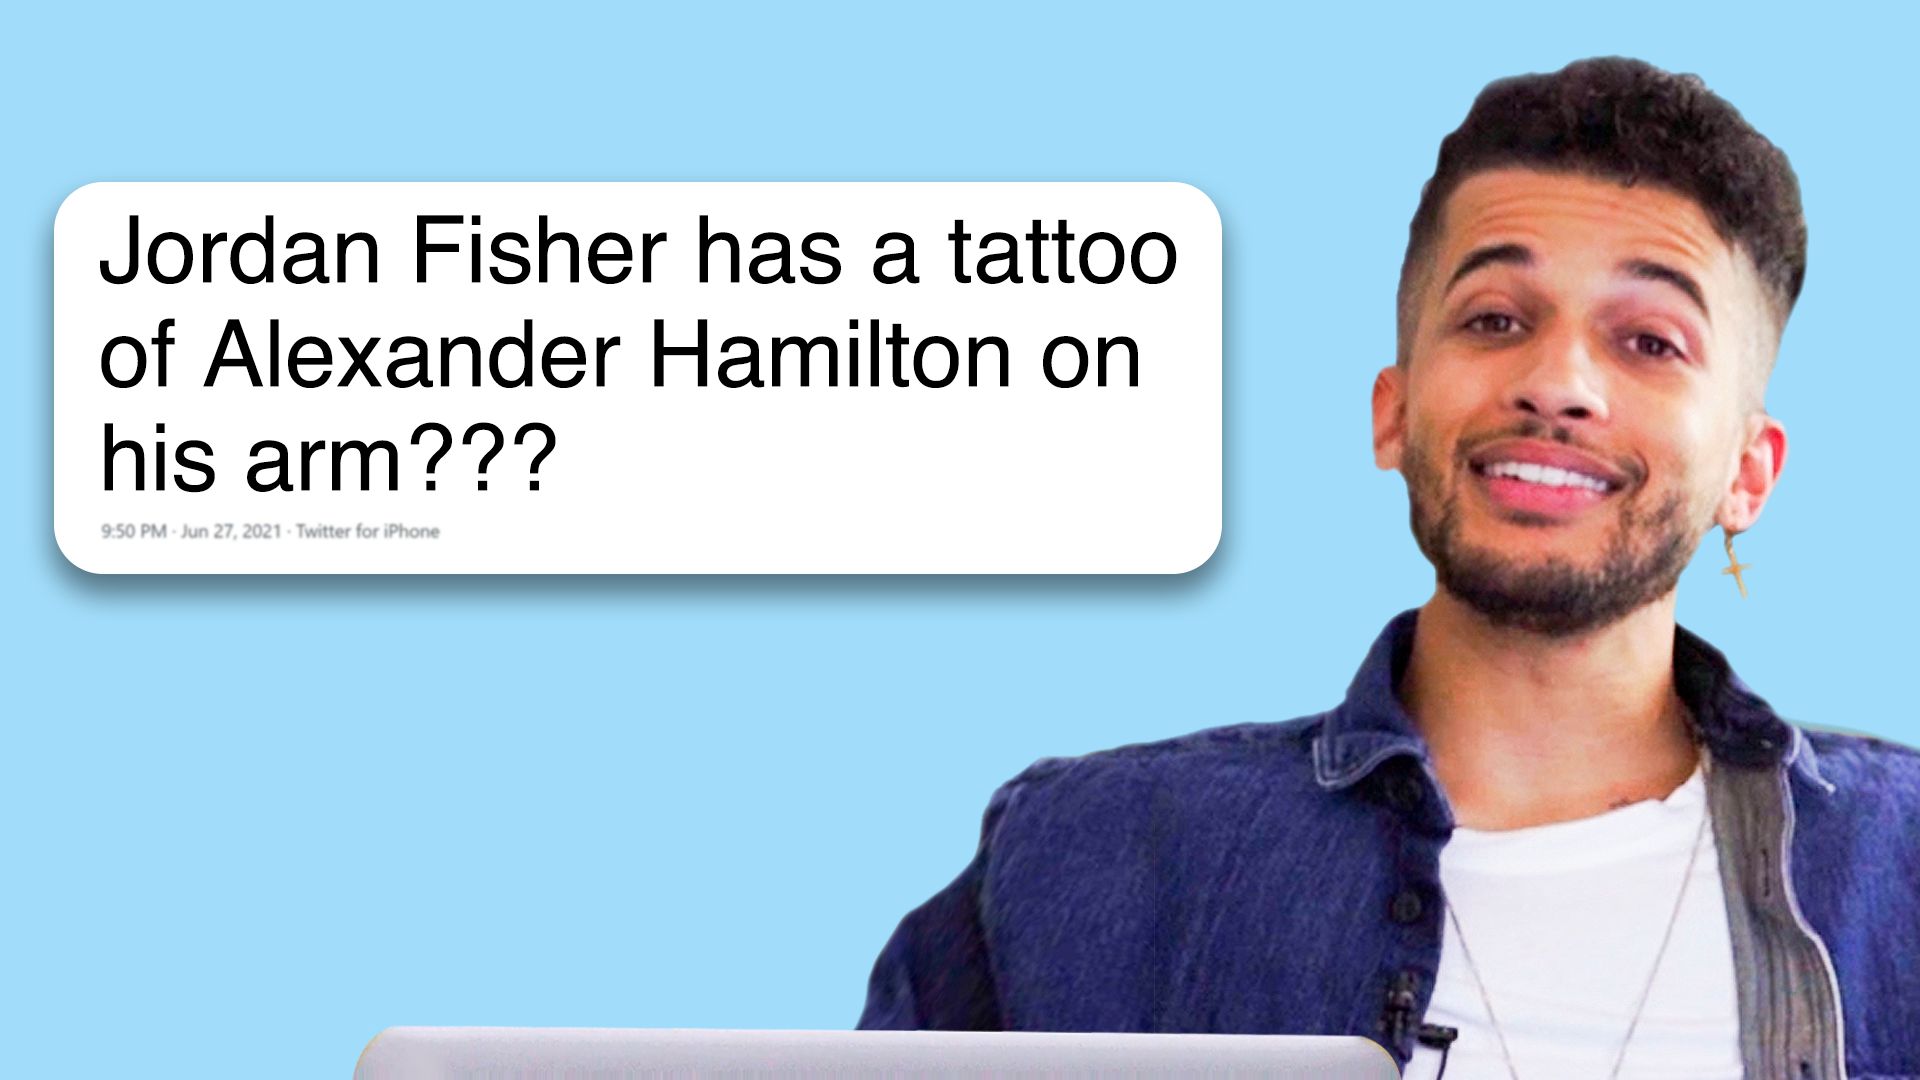 Watch Jordan Fisher Goes Undercover on , Twitter and Wikipedia, Actually Me